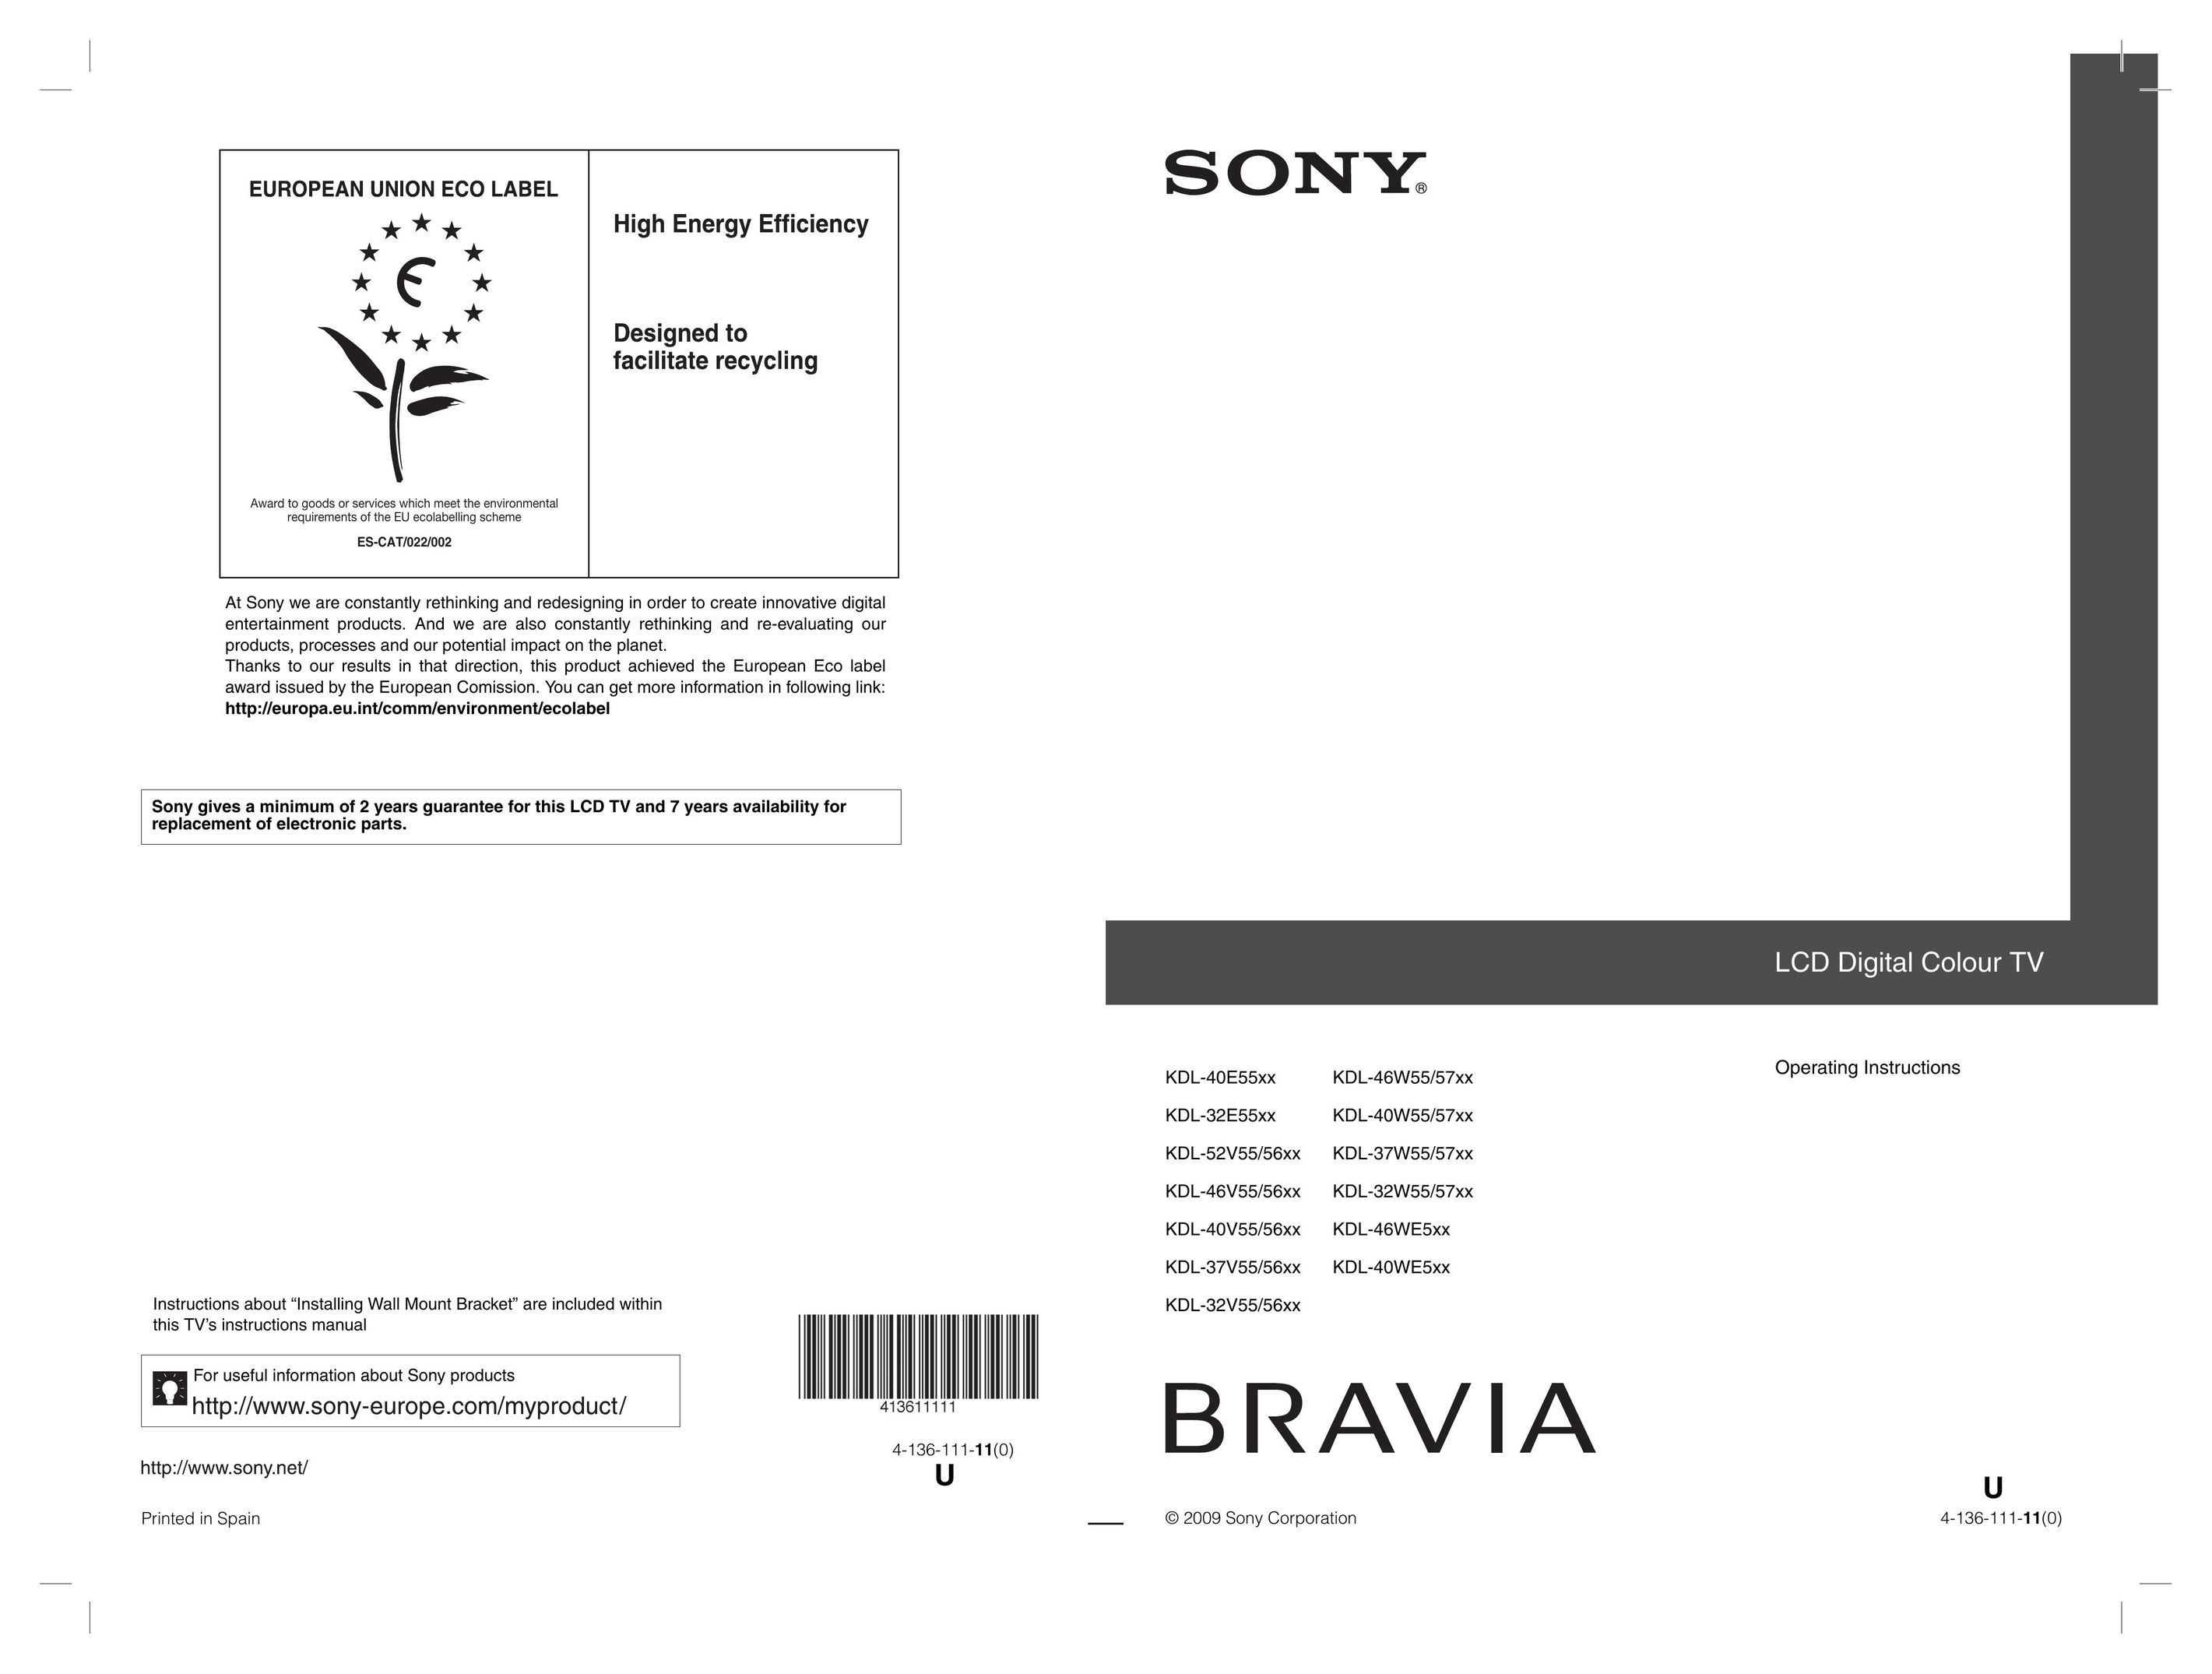 Sony 4-136-111-11(0) Flat Panel Television User Manual